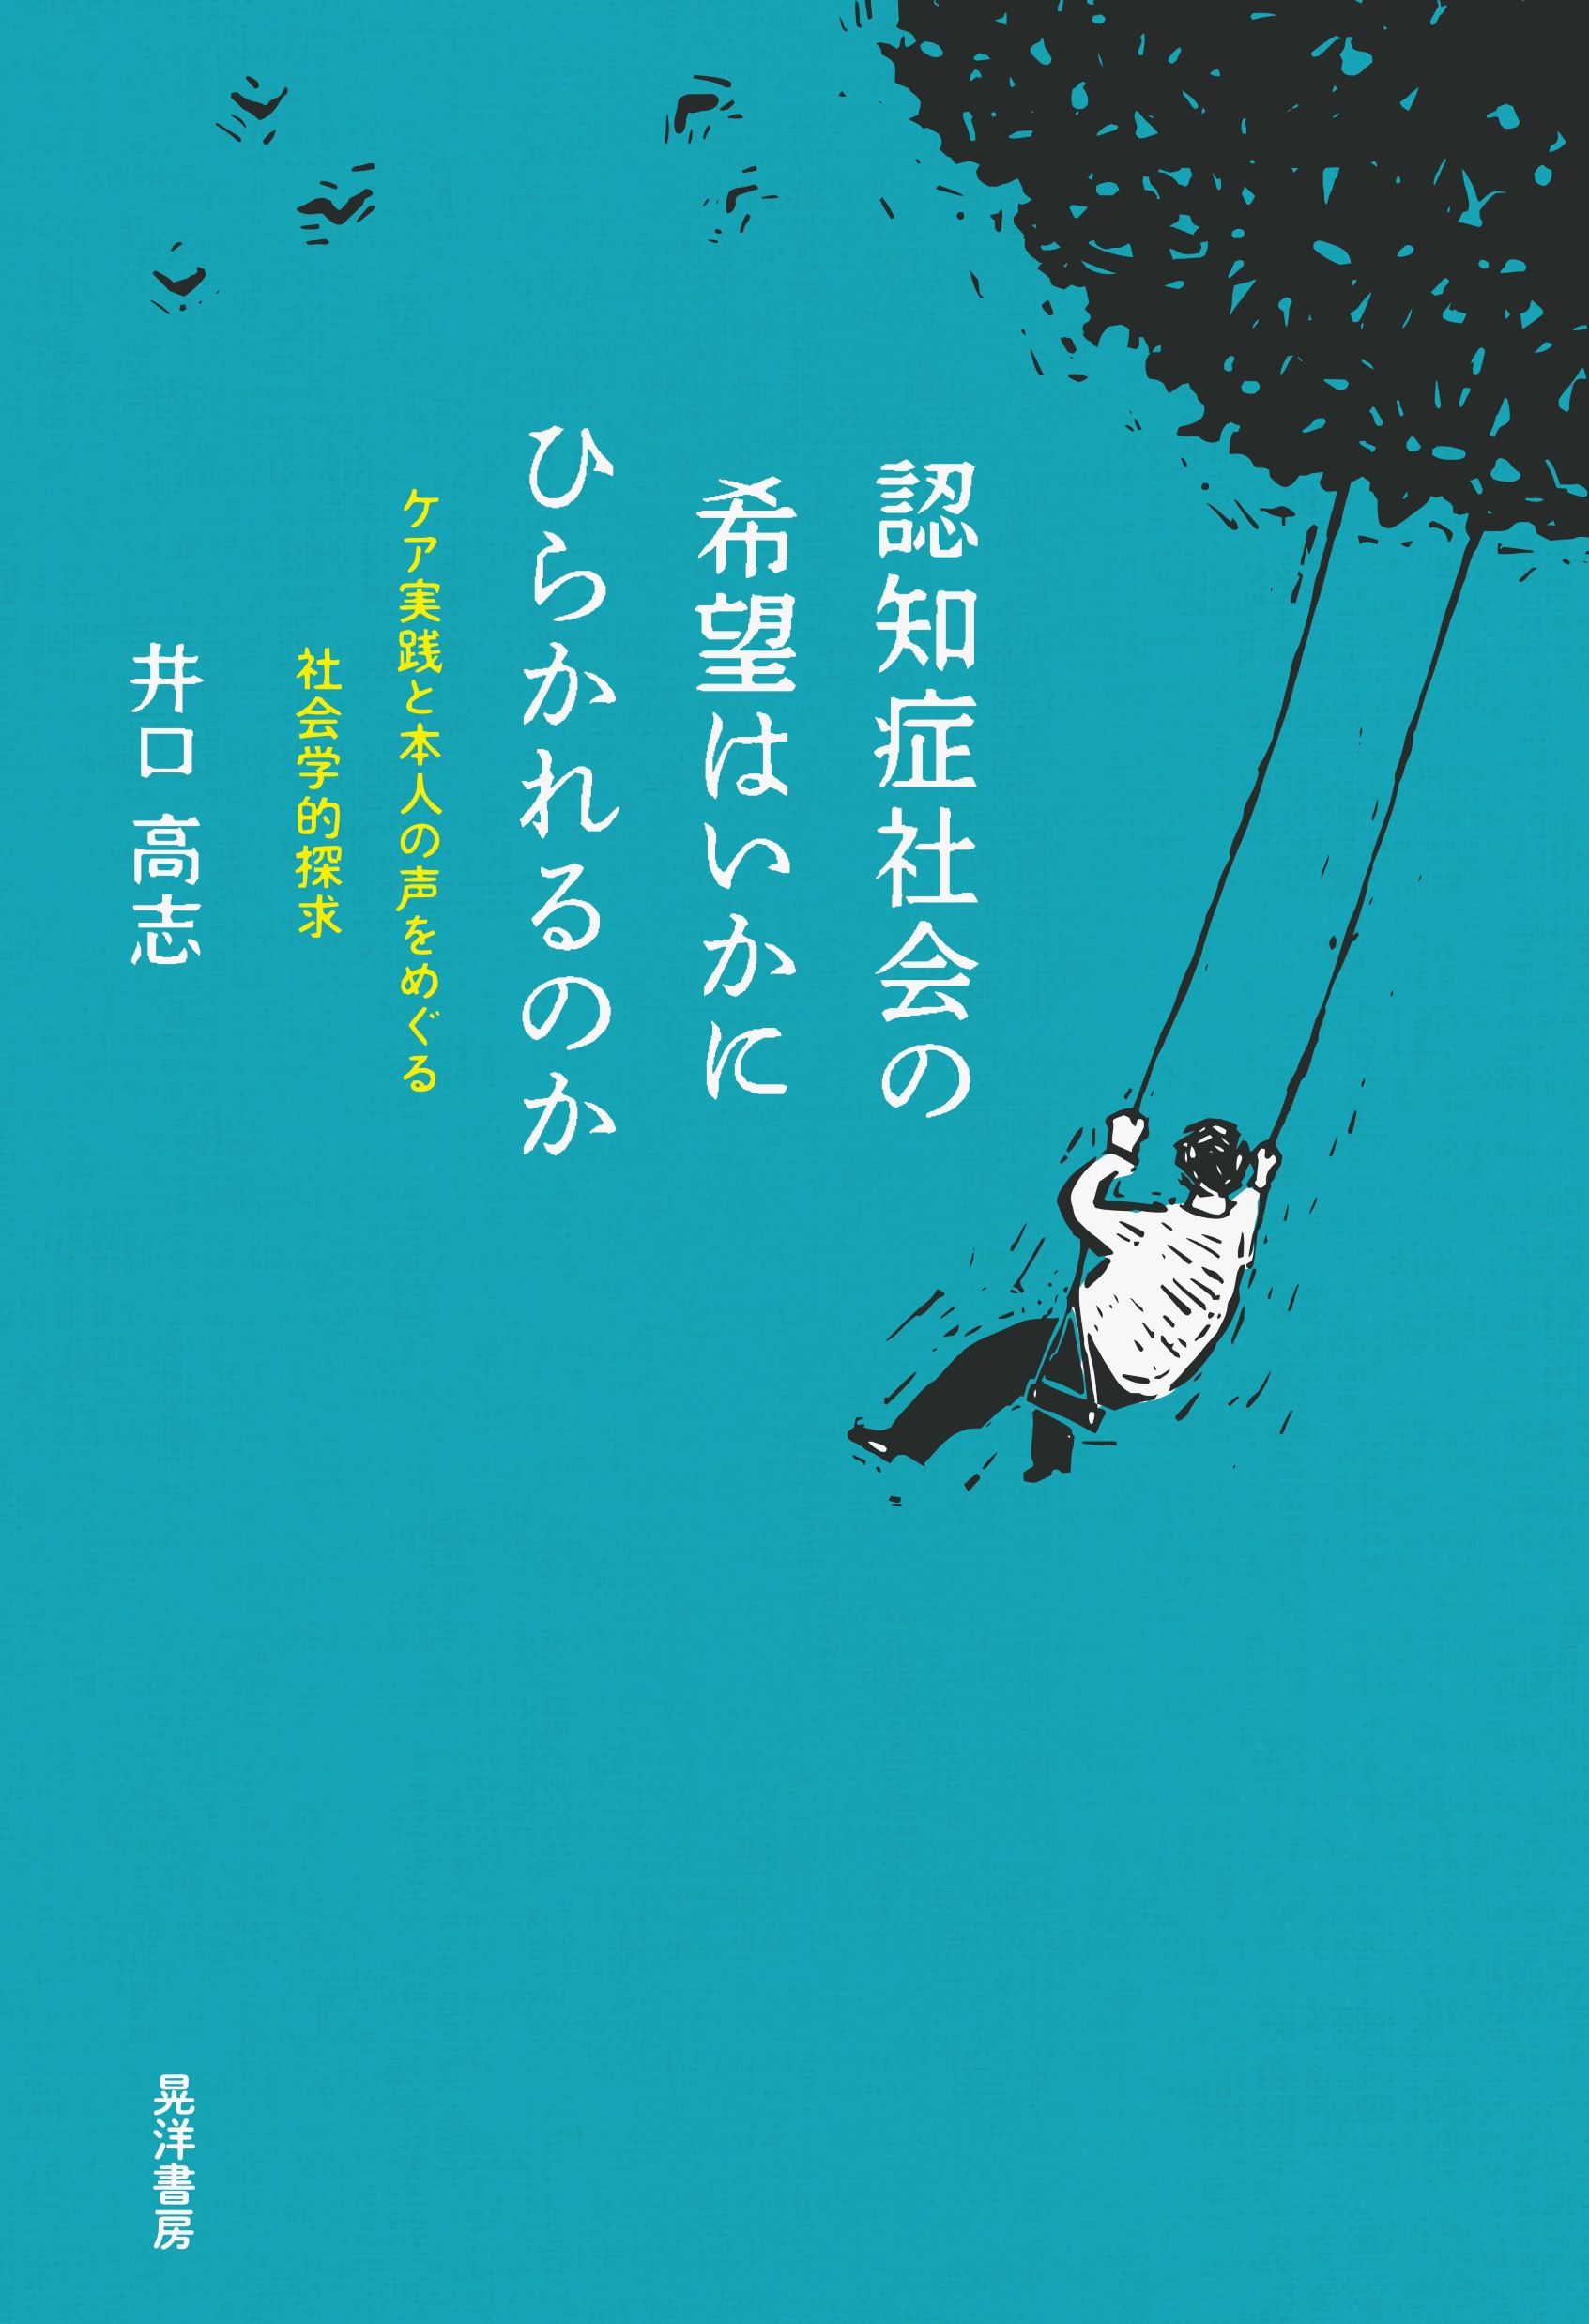 turquoise blue cover with illustration of man on a swing